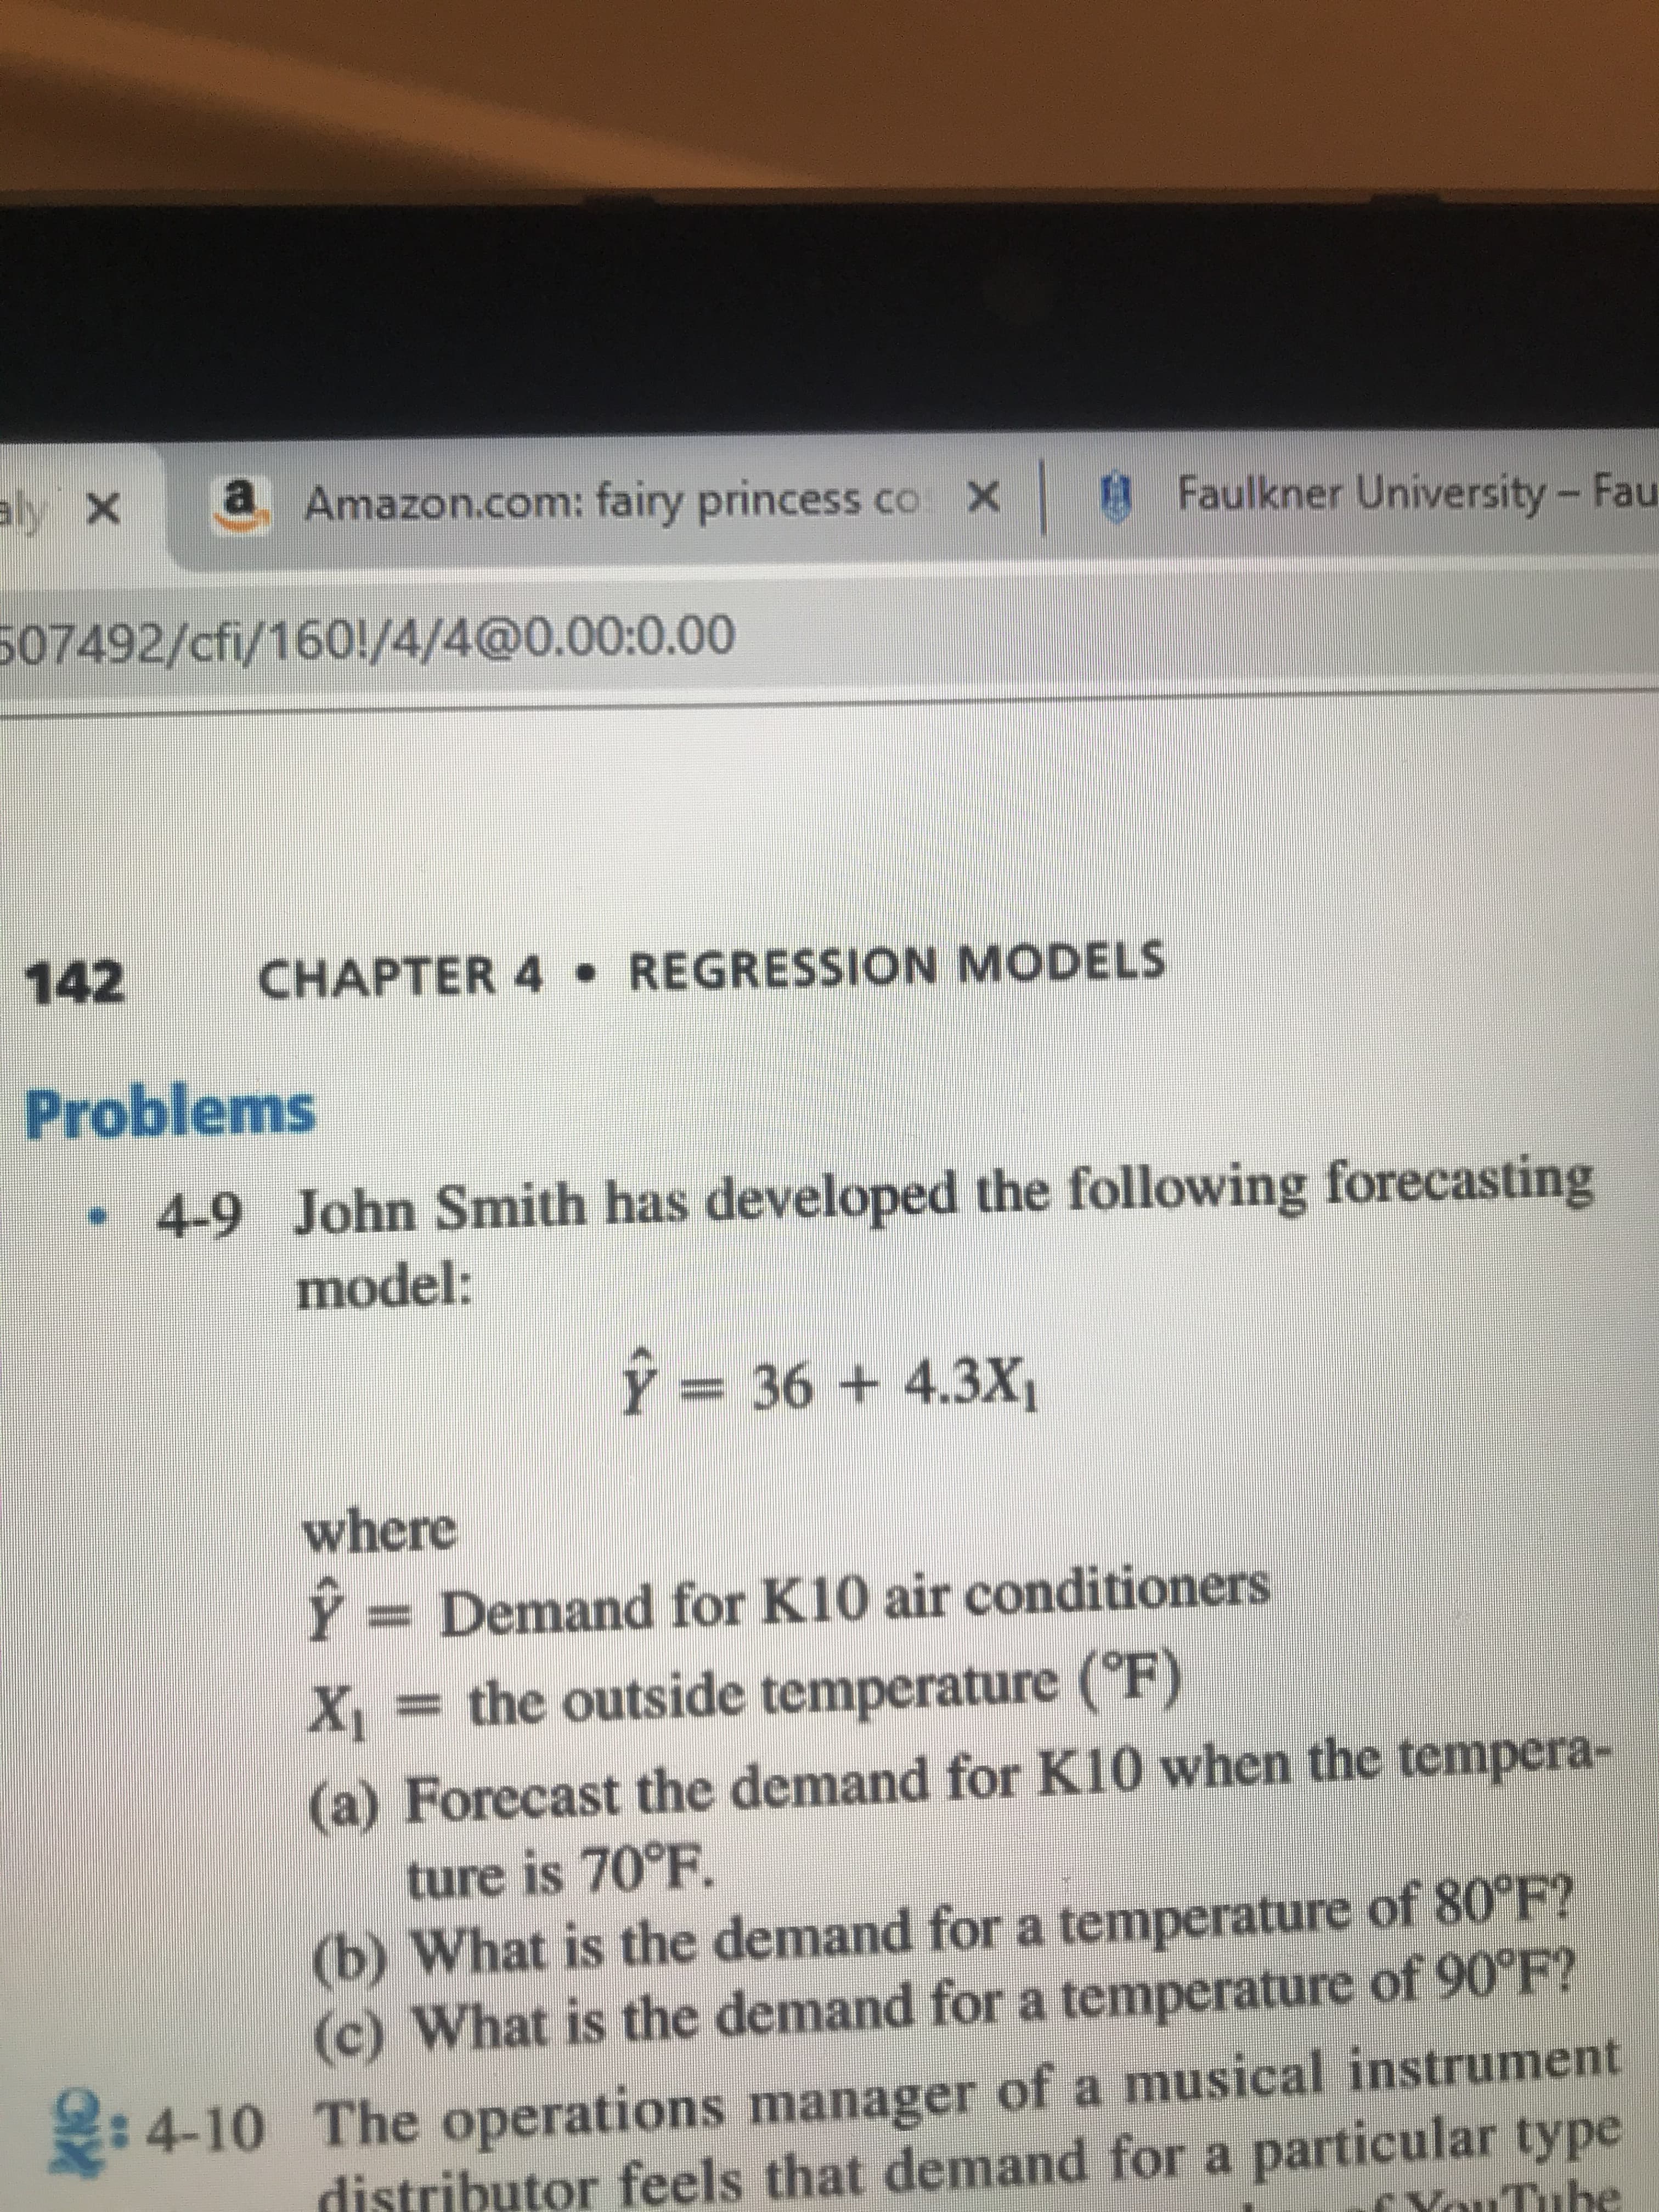 a Amazon.com: fairy princess co X Faulkner University- Fau
aly x
507492/cfi/1601/4/4@0.00:0.00
142
CHAPTER 4
REGRESSION MODELS
Problems
4-9
John Smith has developed the following forecasting
model:
Y = 364.3X
where
Demand for K10 air conditioners
X= the outside temperature (F)
a) Forecast the demand for K10 when the tempera-
ture is 70°F.
(b) What is the demand for a temperature of 80°F?
(c) What is the demand for a temperature of 90°F?
4-10 The operations manager of a musical instrument
distributor feels that demand for a particular type
r VouTube
